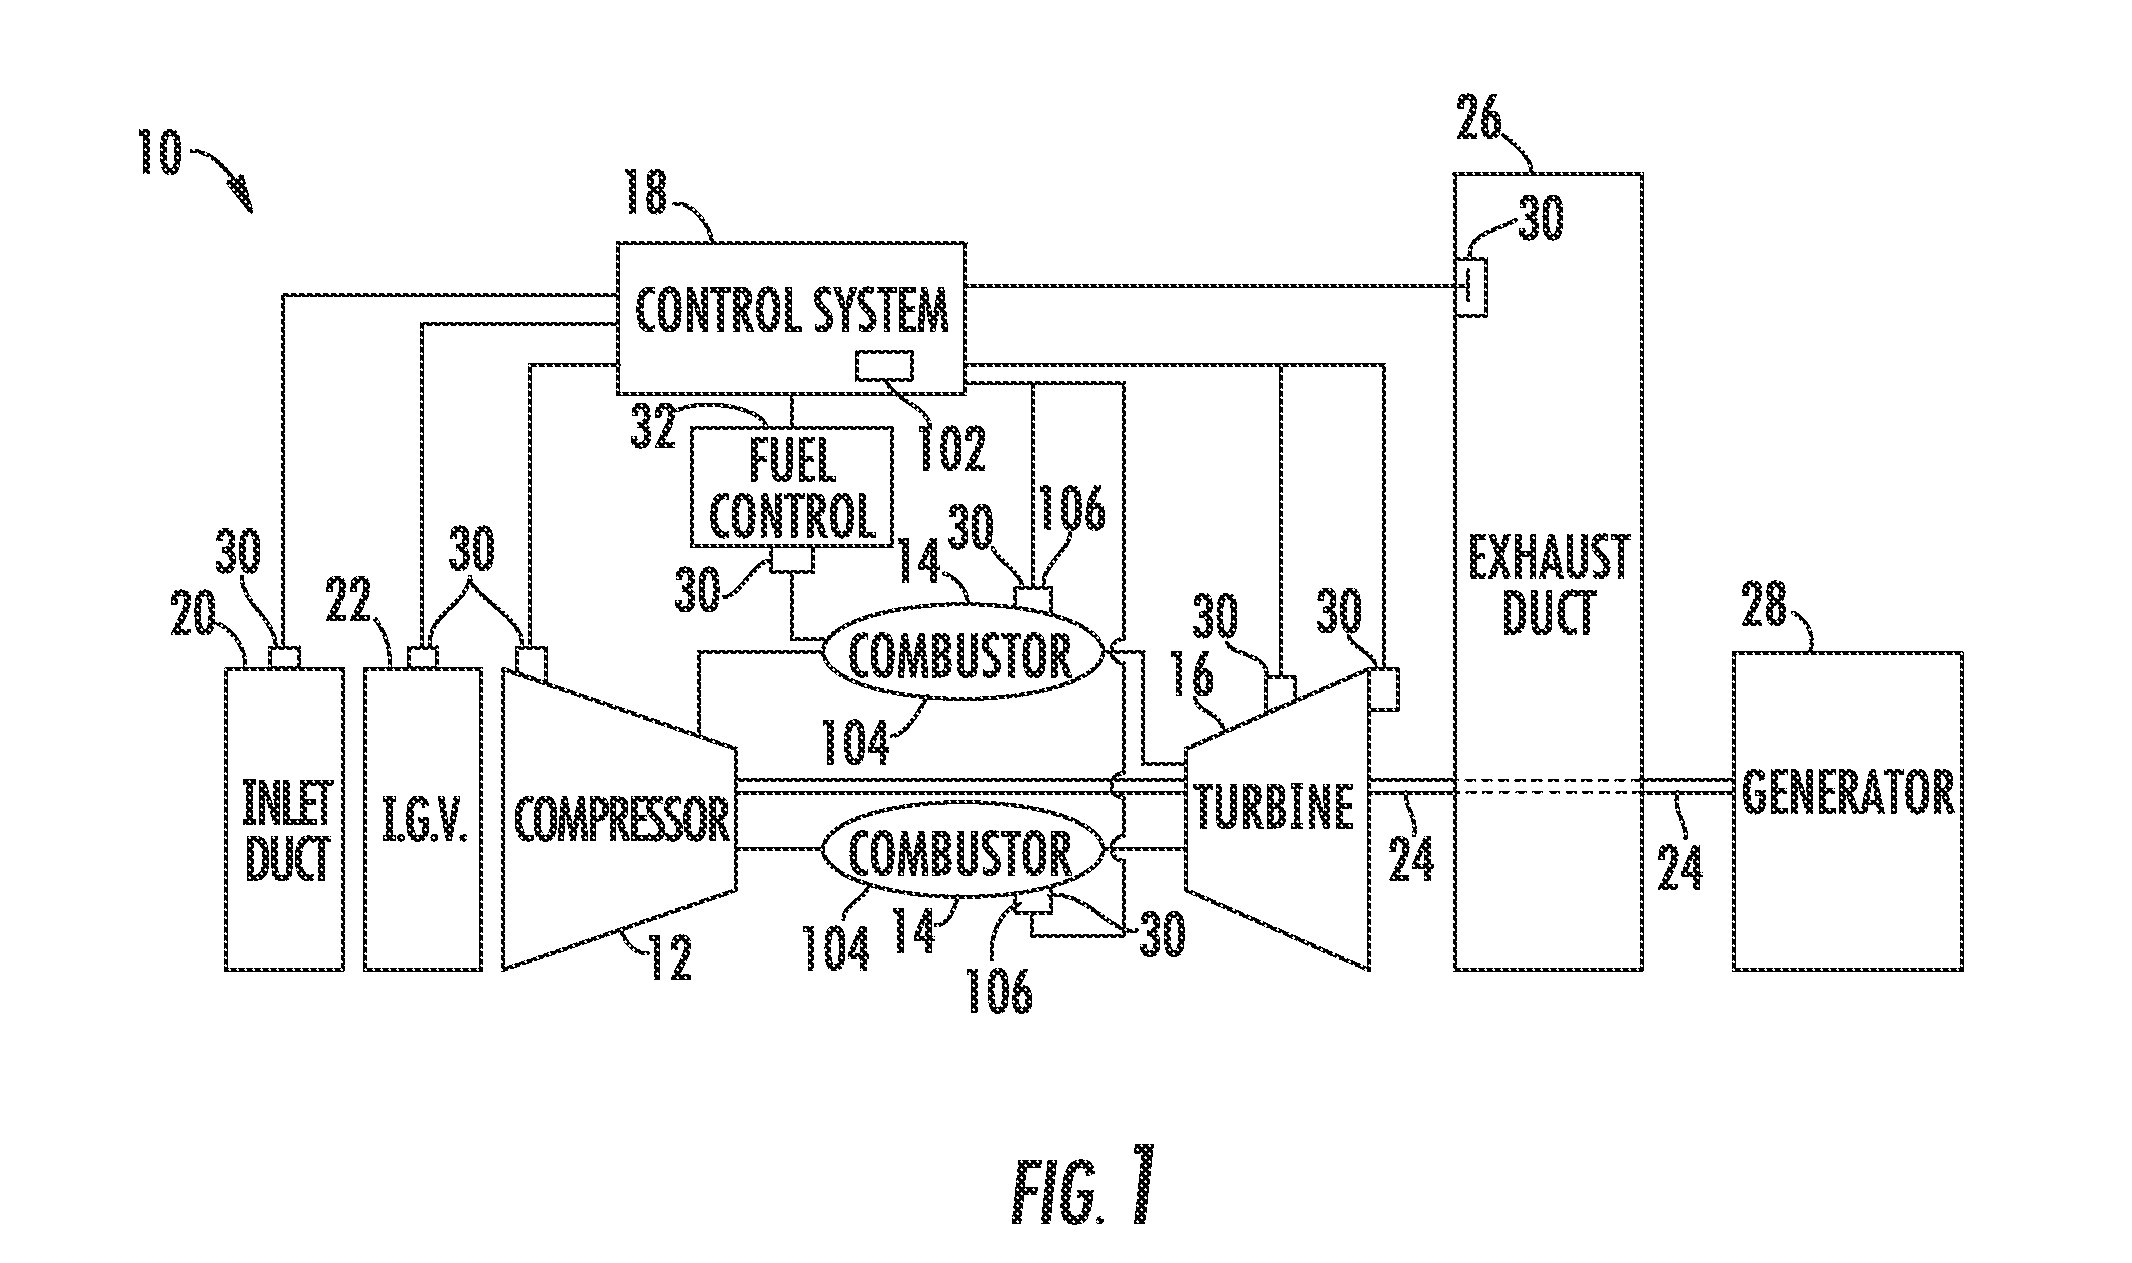 System and Method for Detecting an At-Fault Combustor